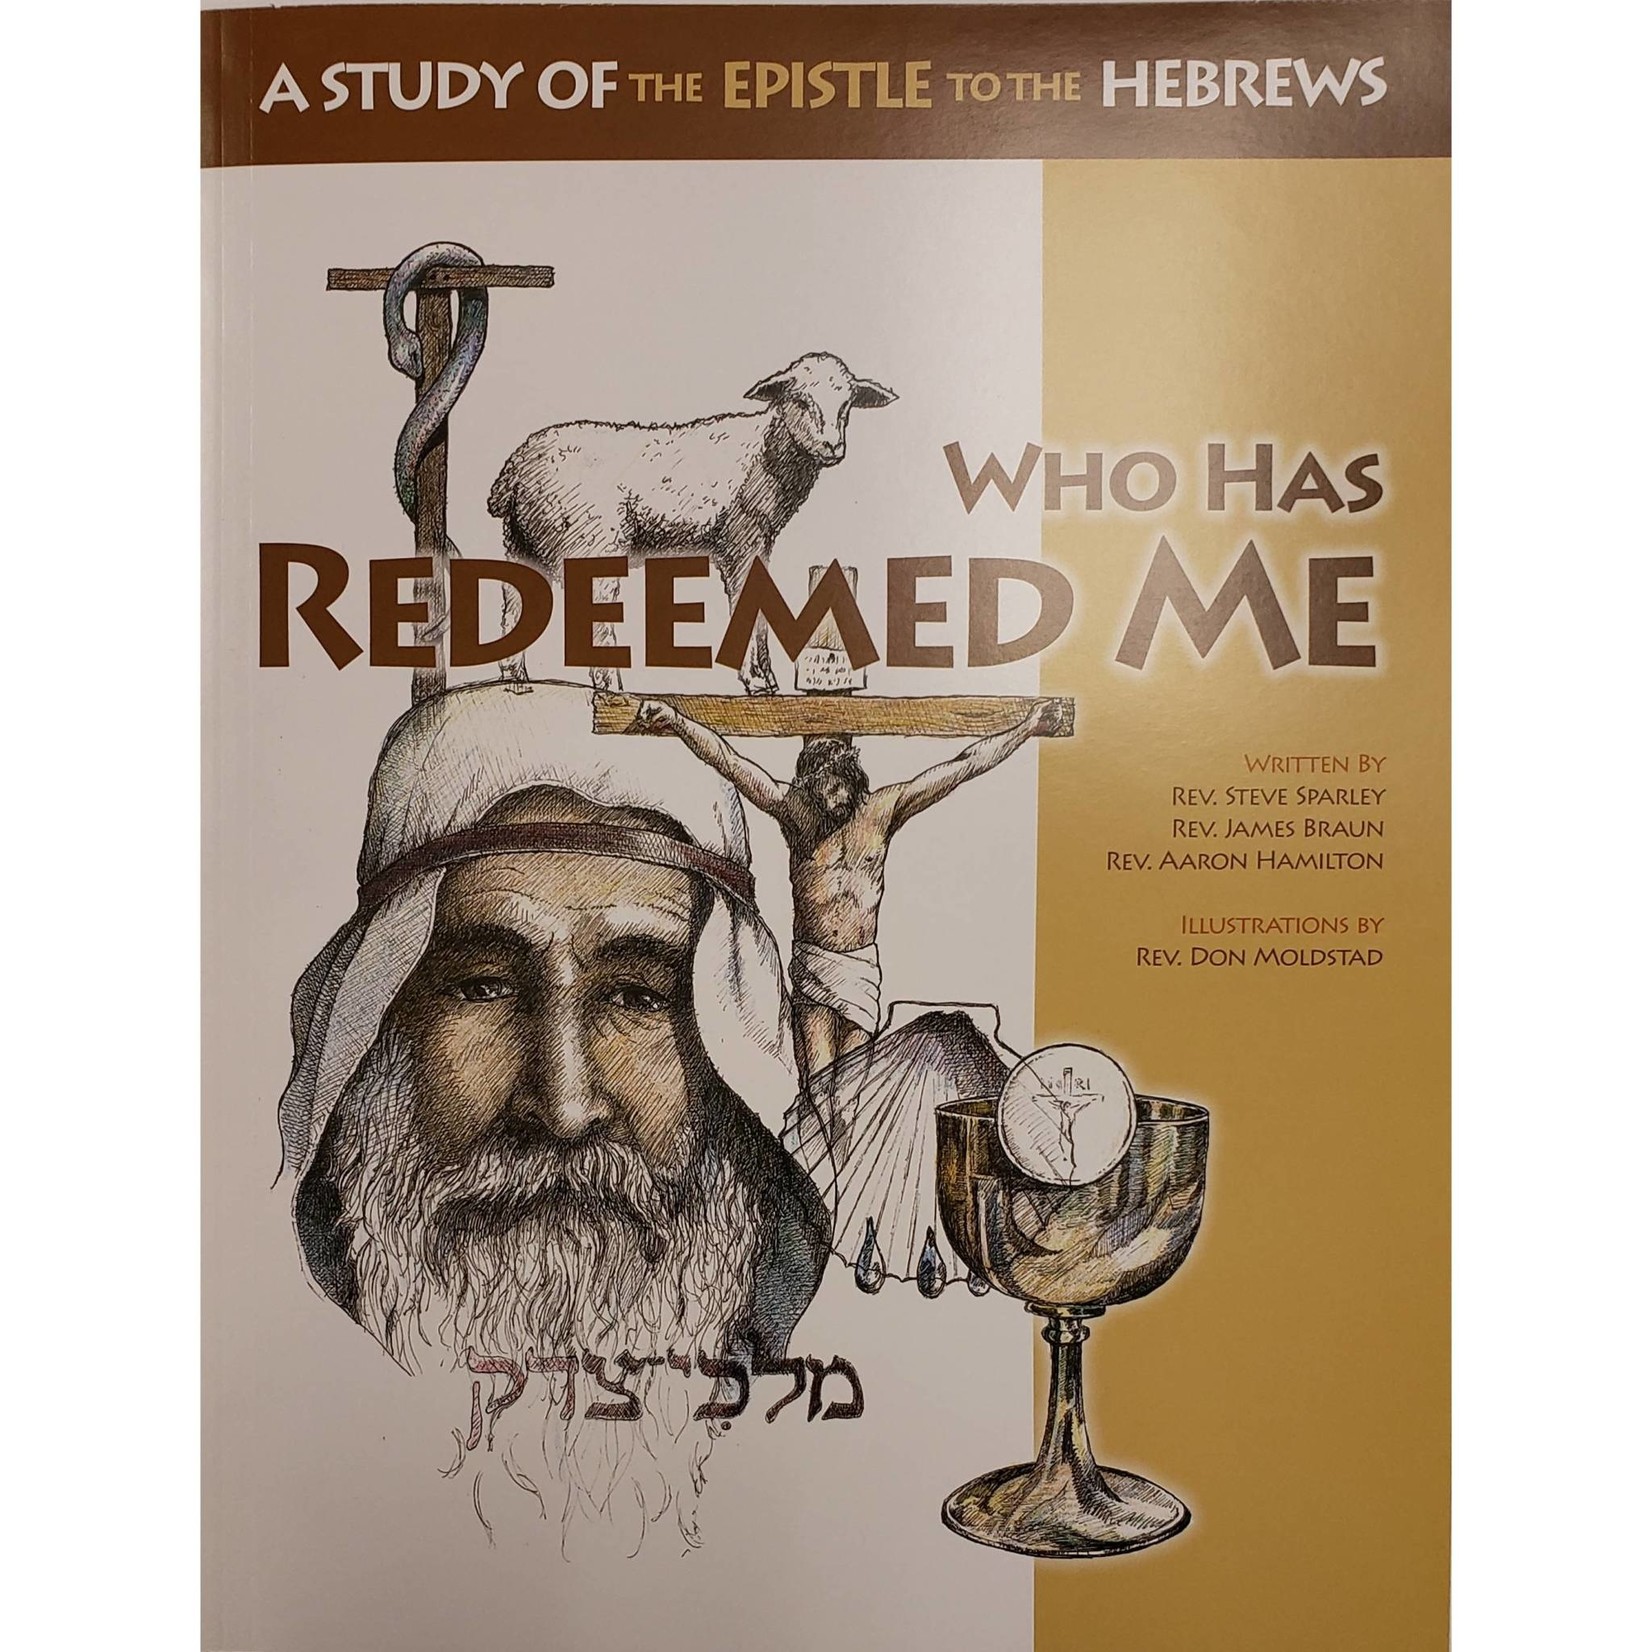 Who Has Redeemed Me - A Study of the Epistle to the Hebrews